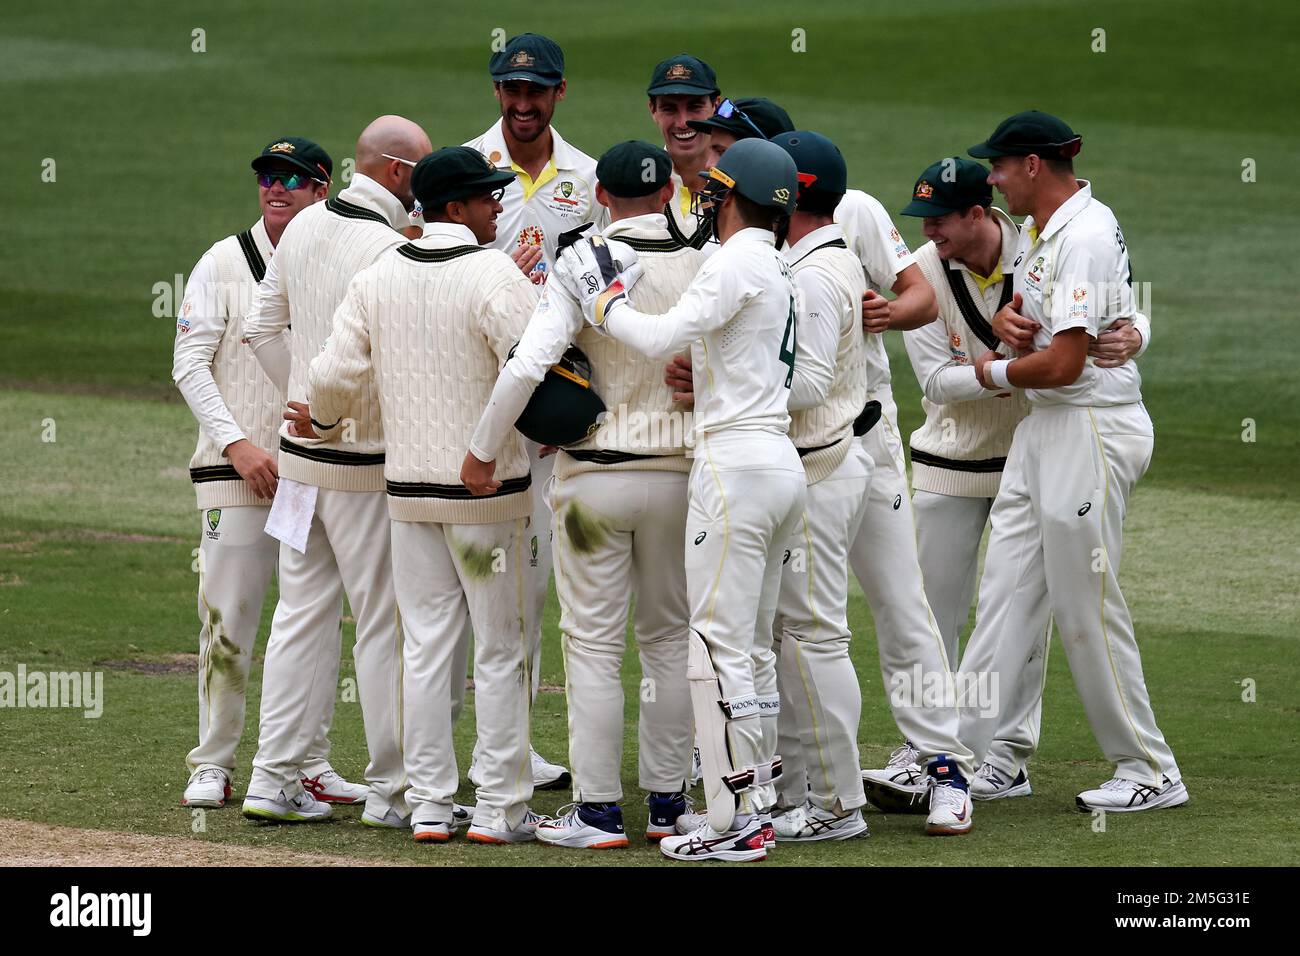 Melbourne, Australia, 29 December, 2022. Australia celebrates during the Boxing Day Test Match between Australia and South Africa at The Melbourne Cricket Ground on December 29, 2022 in Melbourne, Australia. Credit: Dave Hewison/Speed Media/Alamy Live News Stock Photo